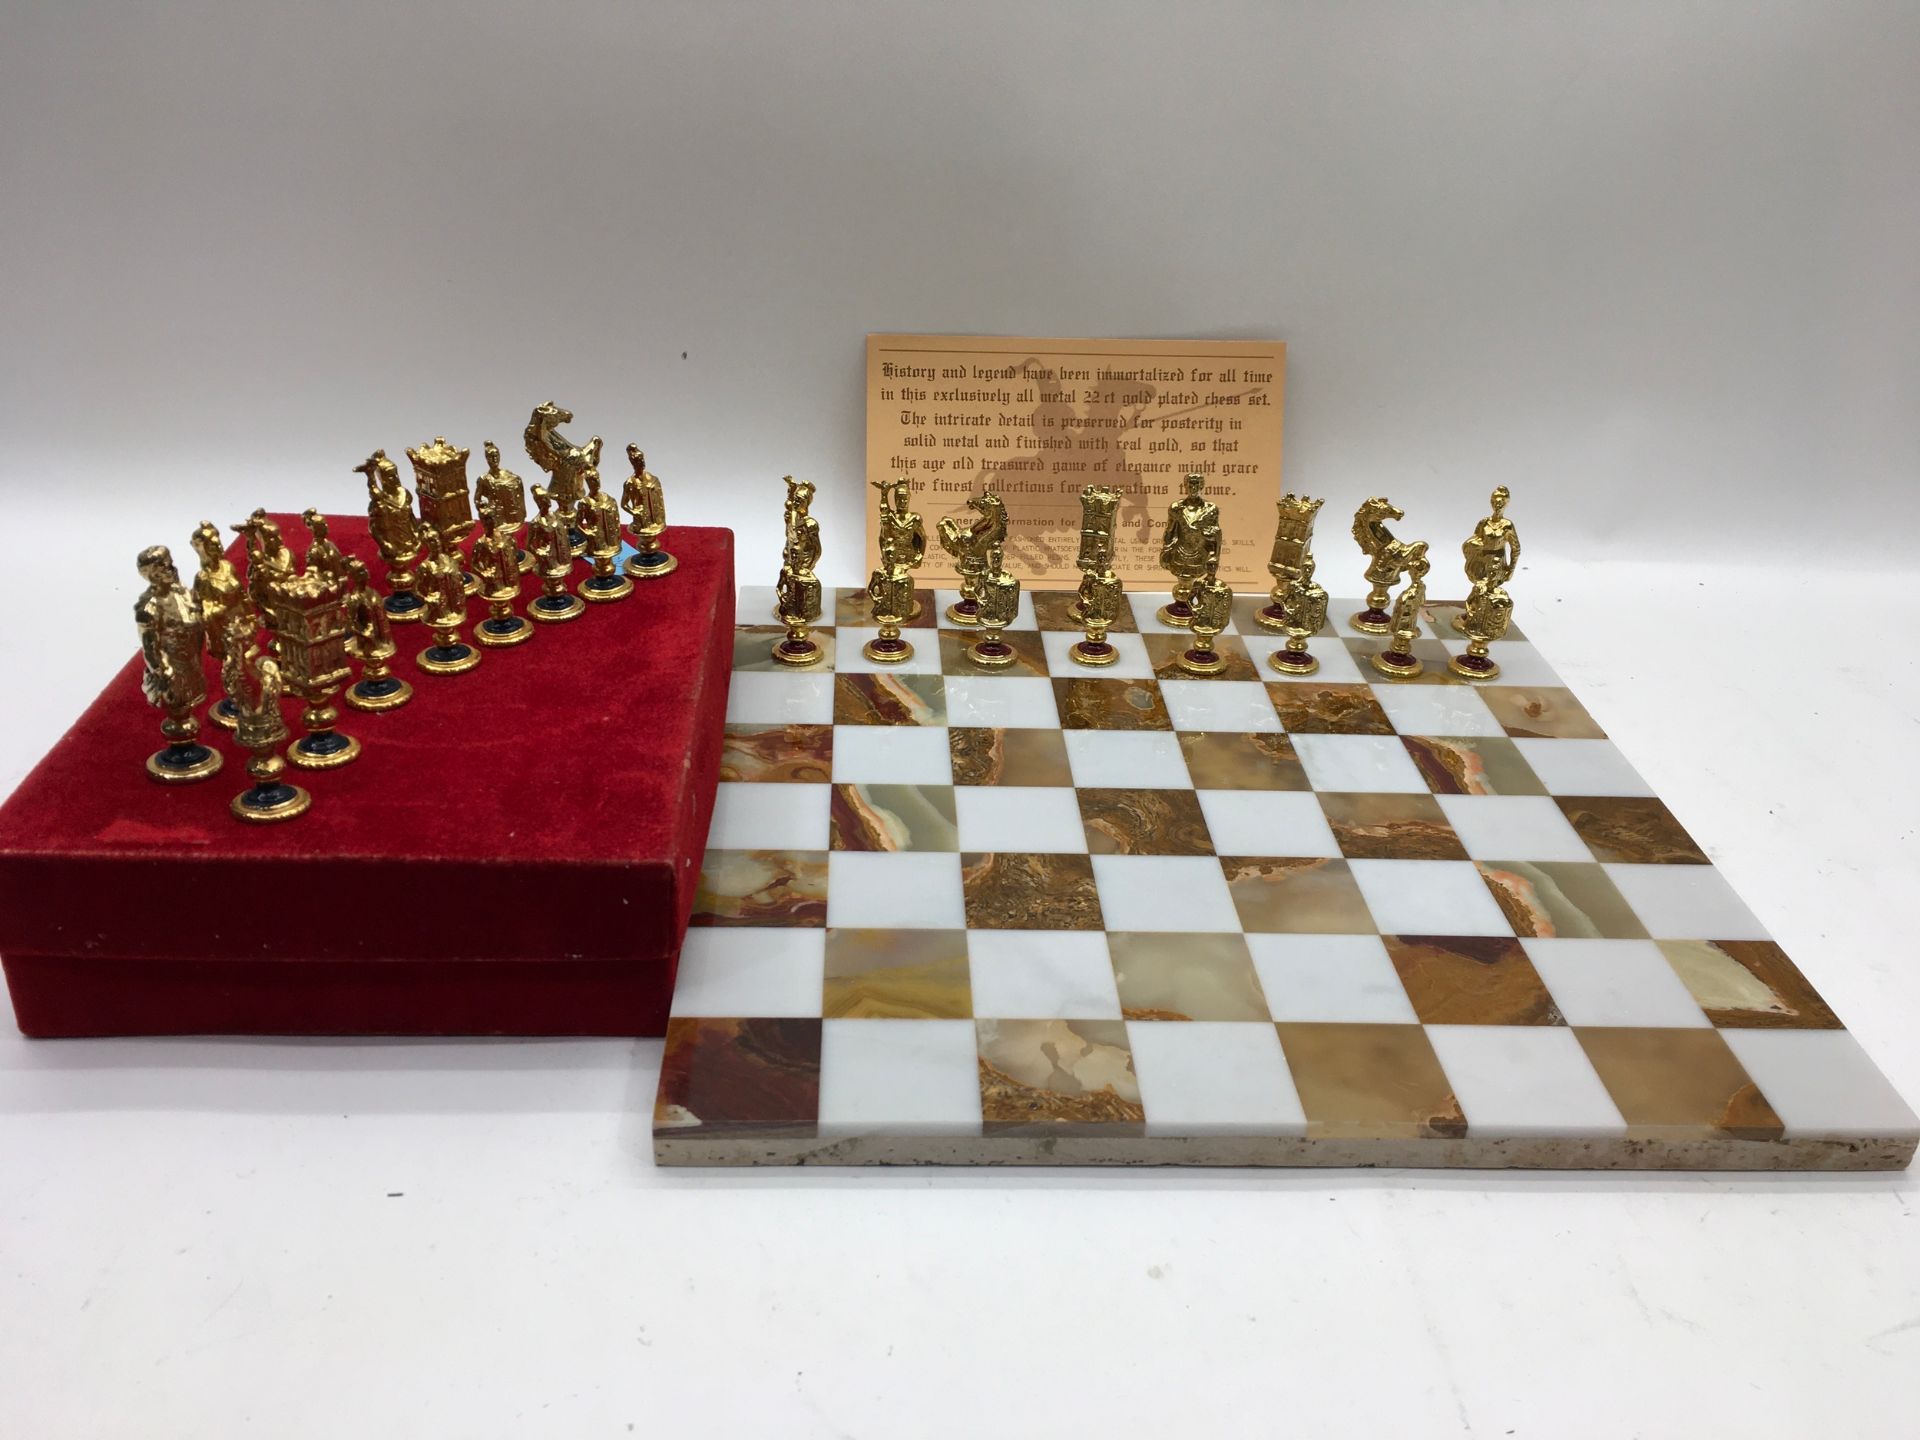 A chess set with marble board.